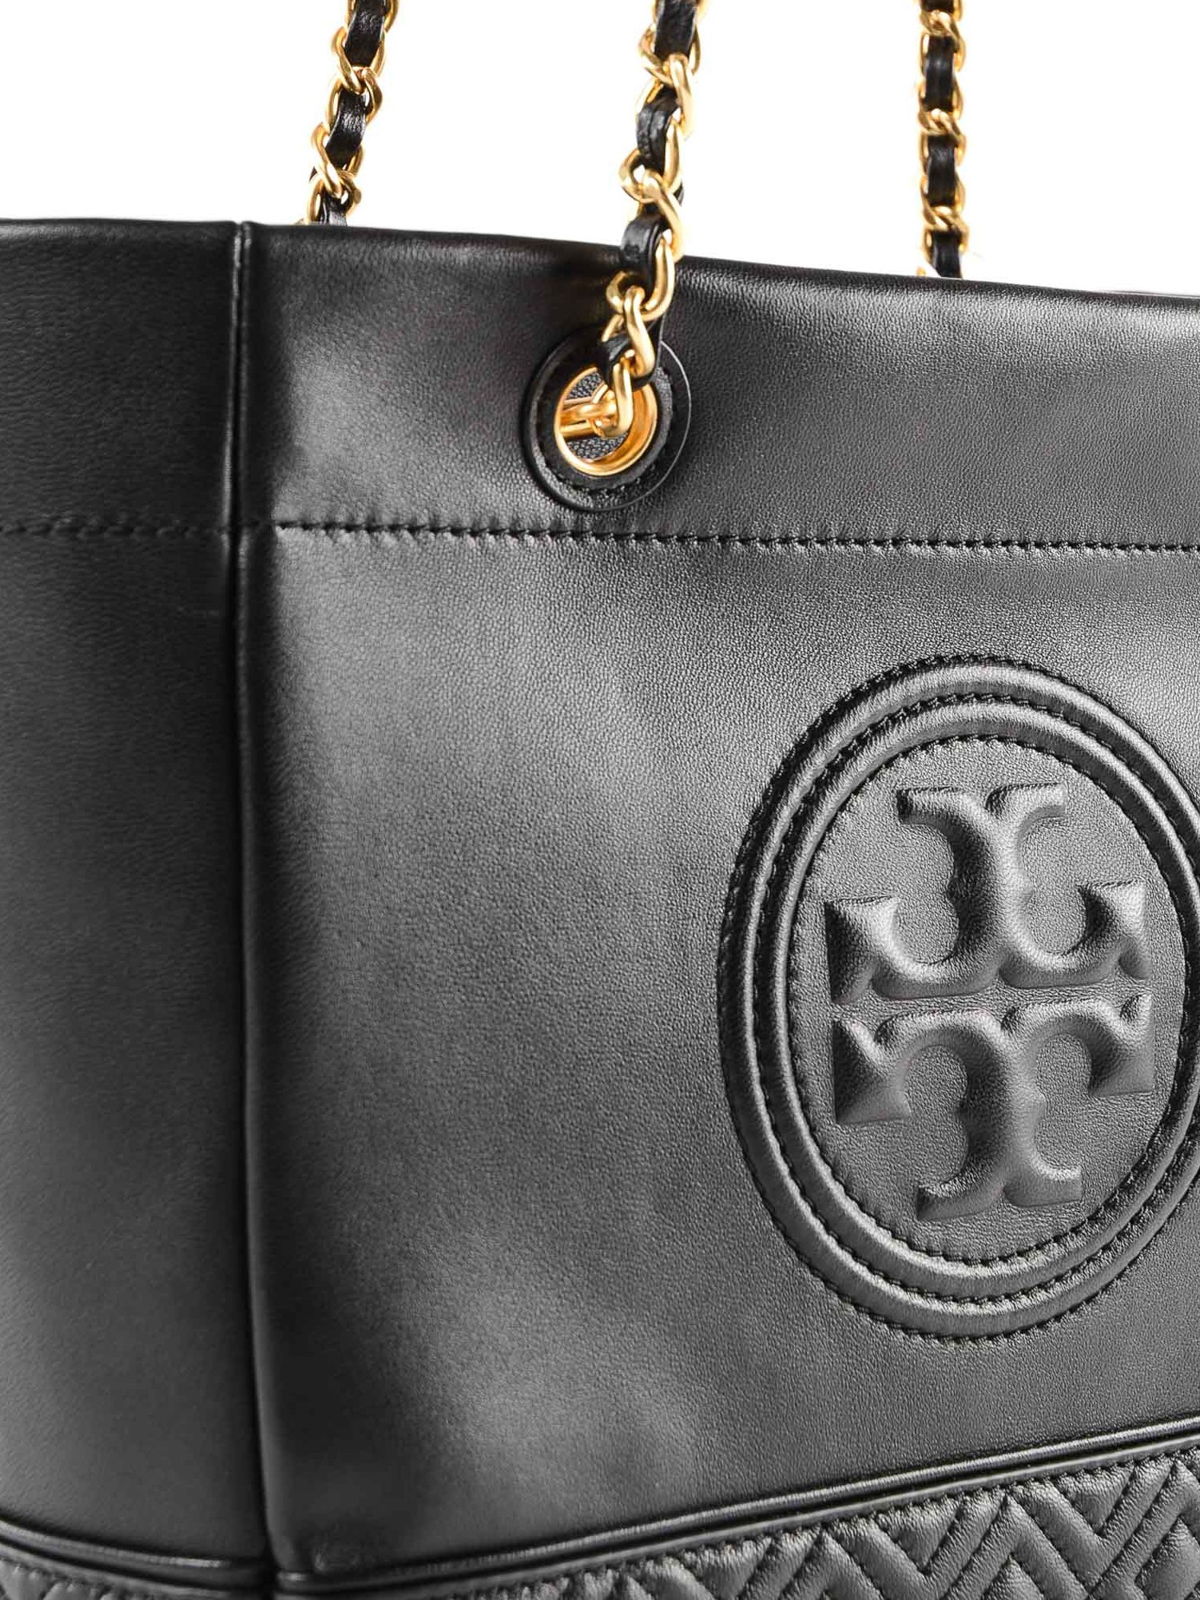 Tory Burch, Bags, New Tory Burch Fleming Quilted Leather Black Tote Bag